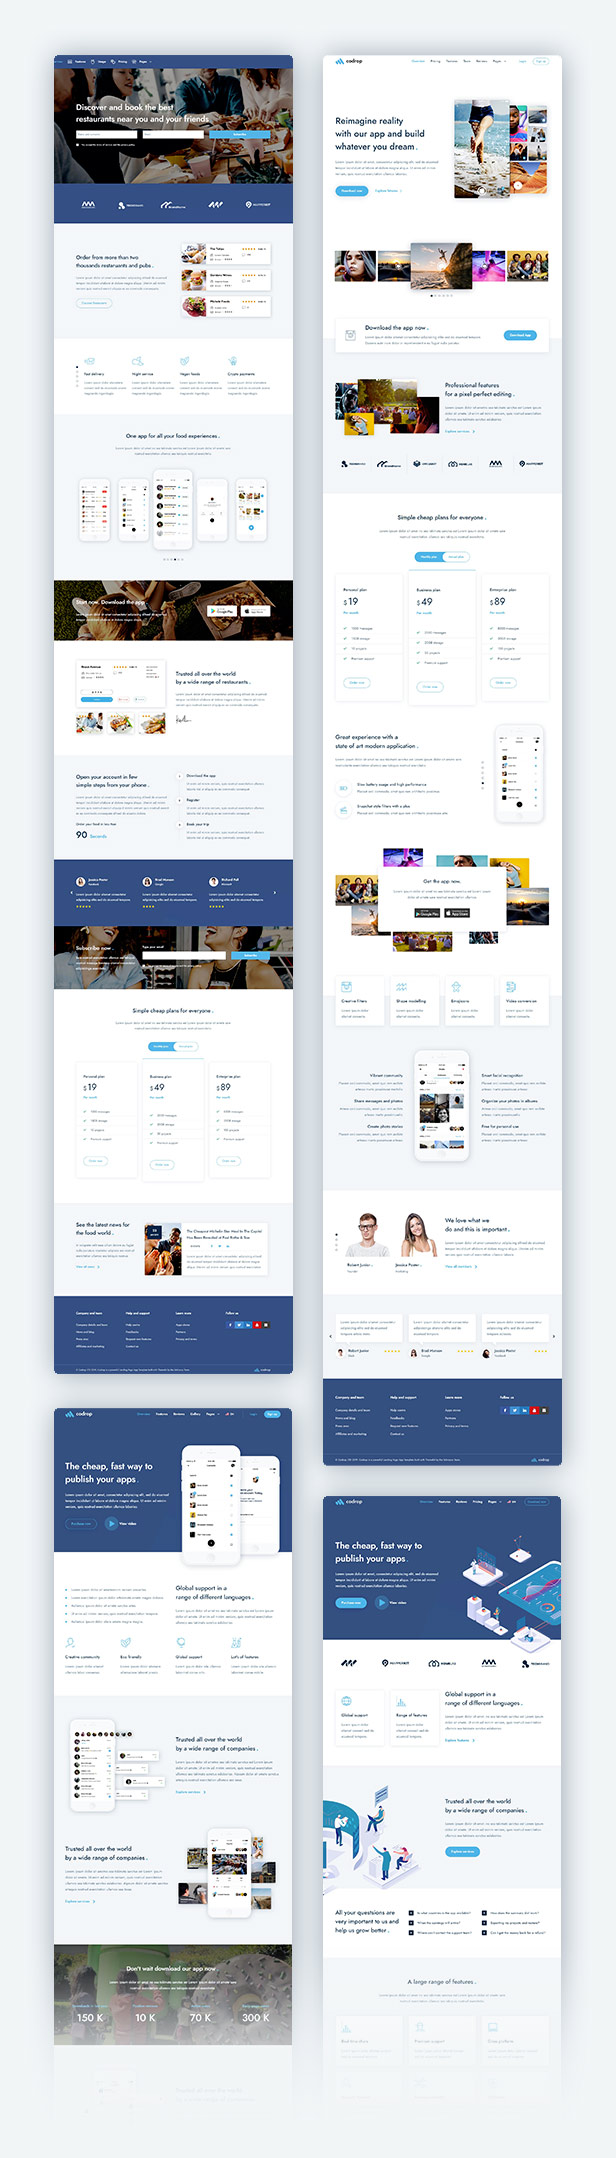 Codrop - App Landing Page And One Page Template - 1